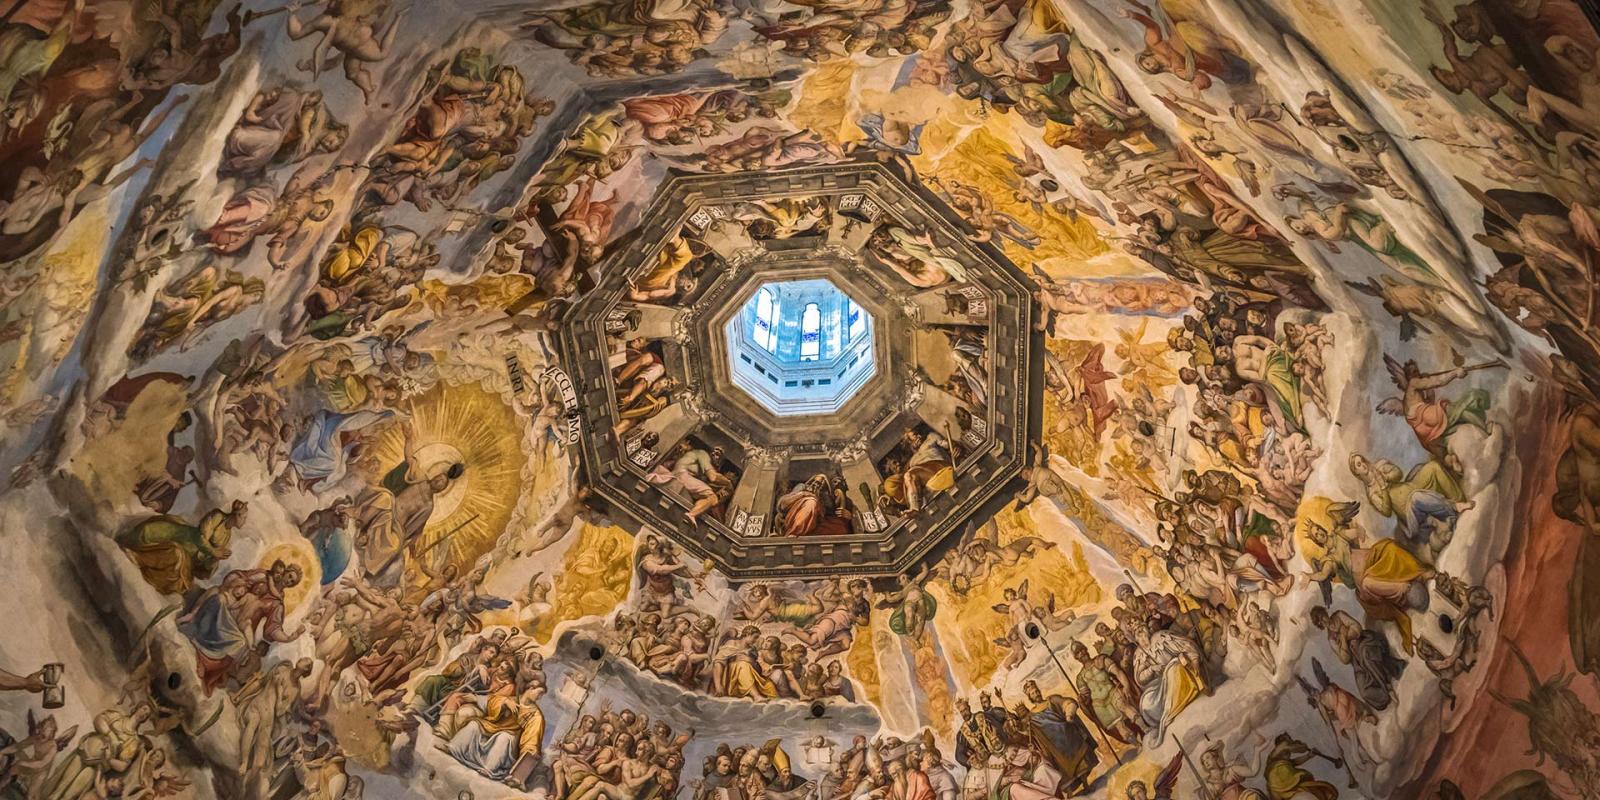 Paintings inside the dome © Duomo Firenze